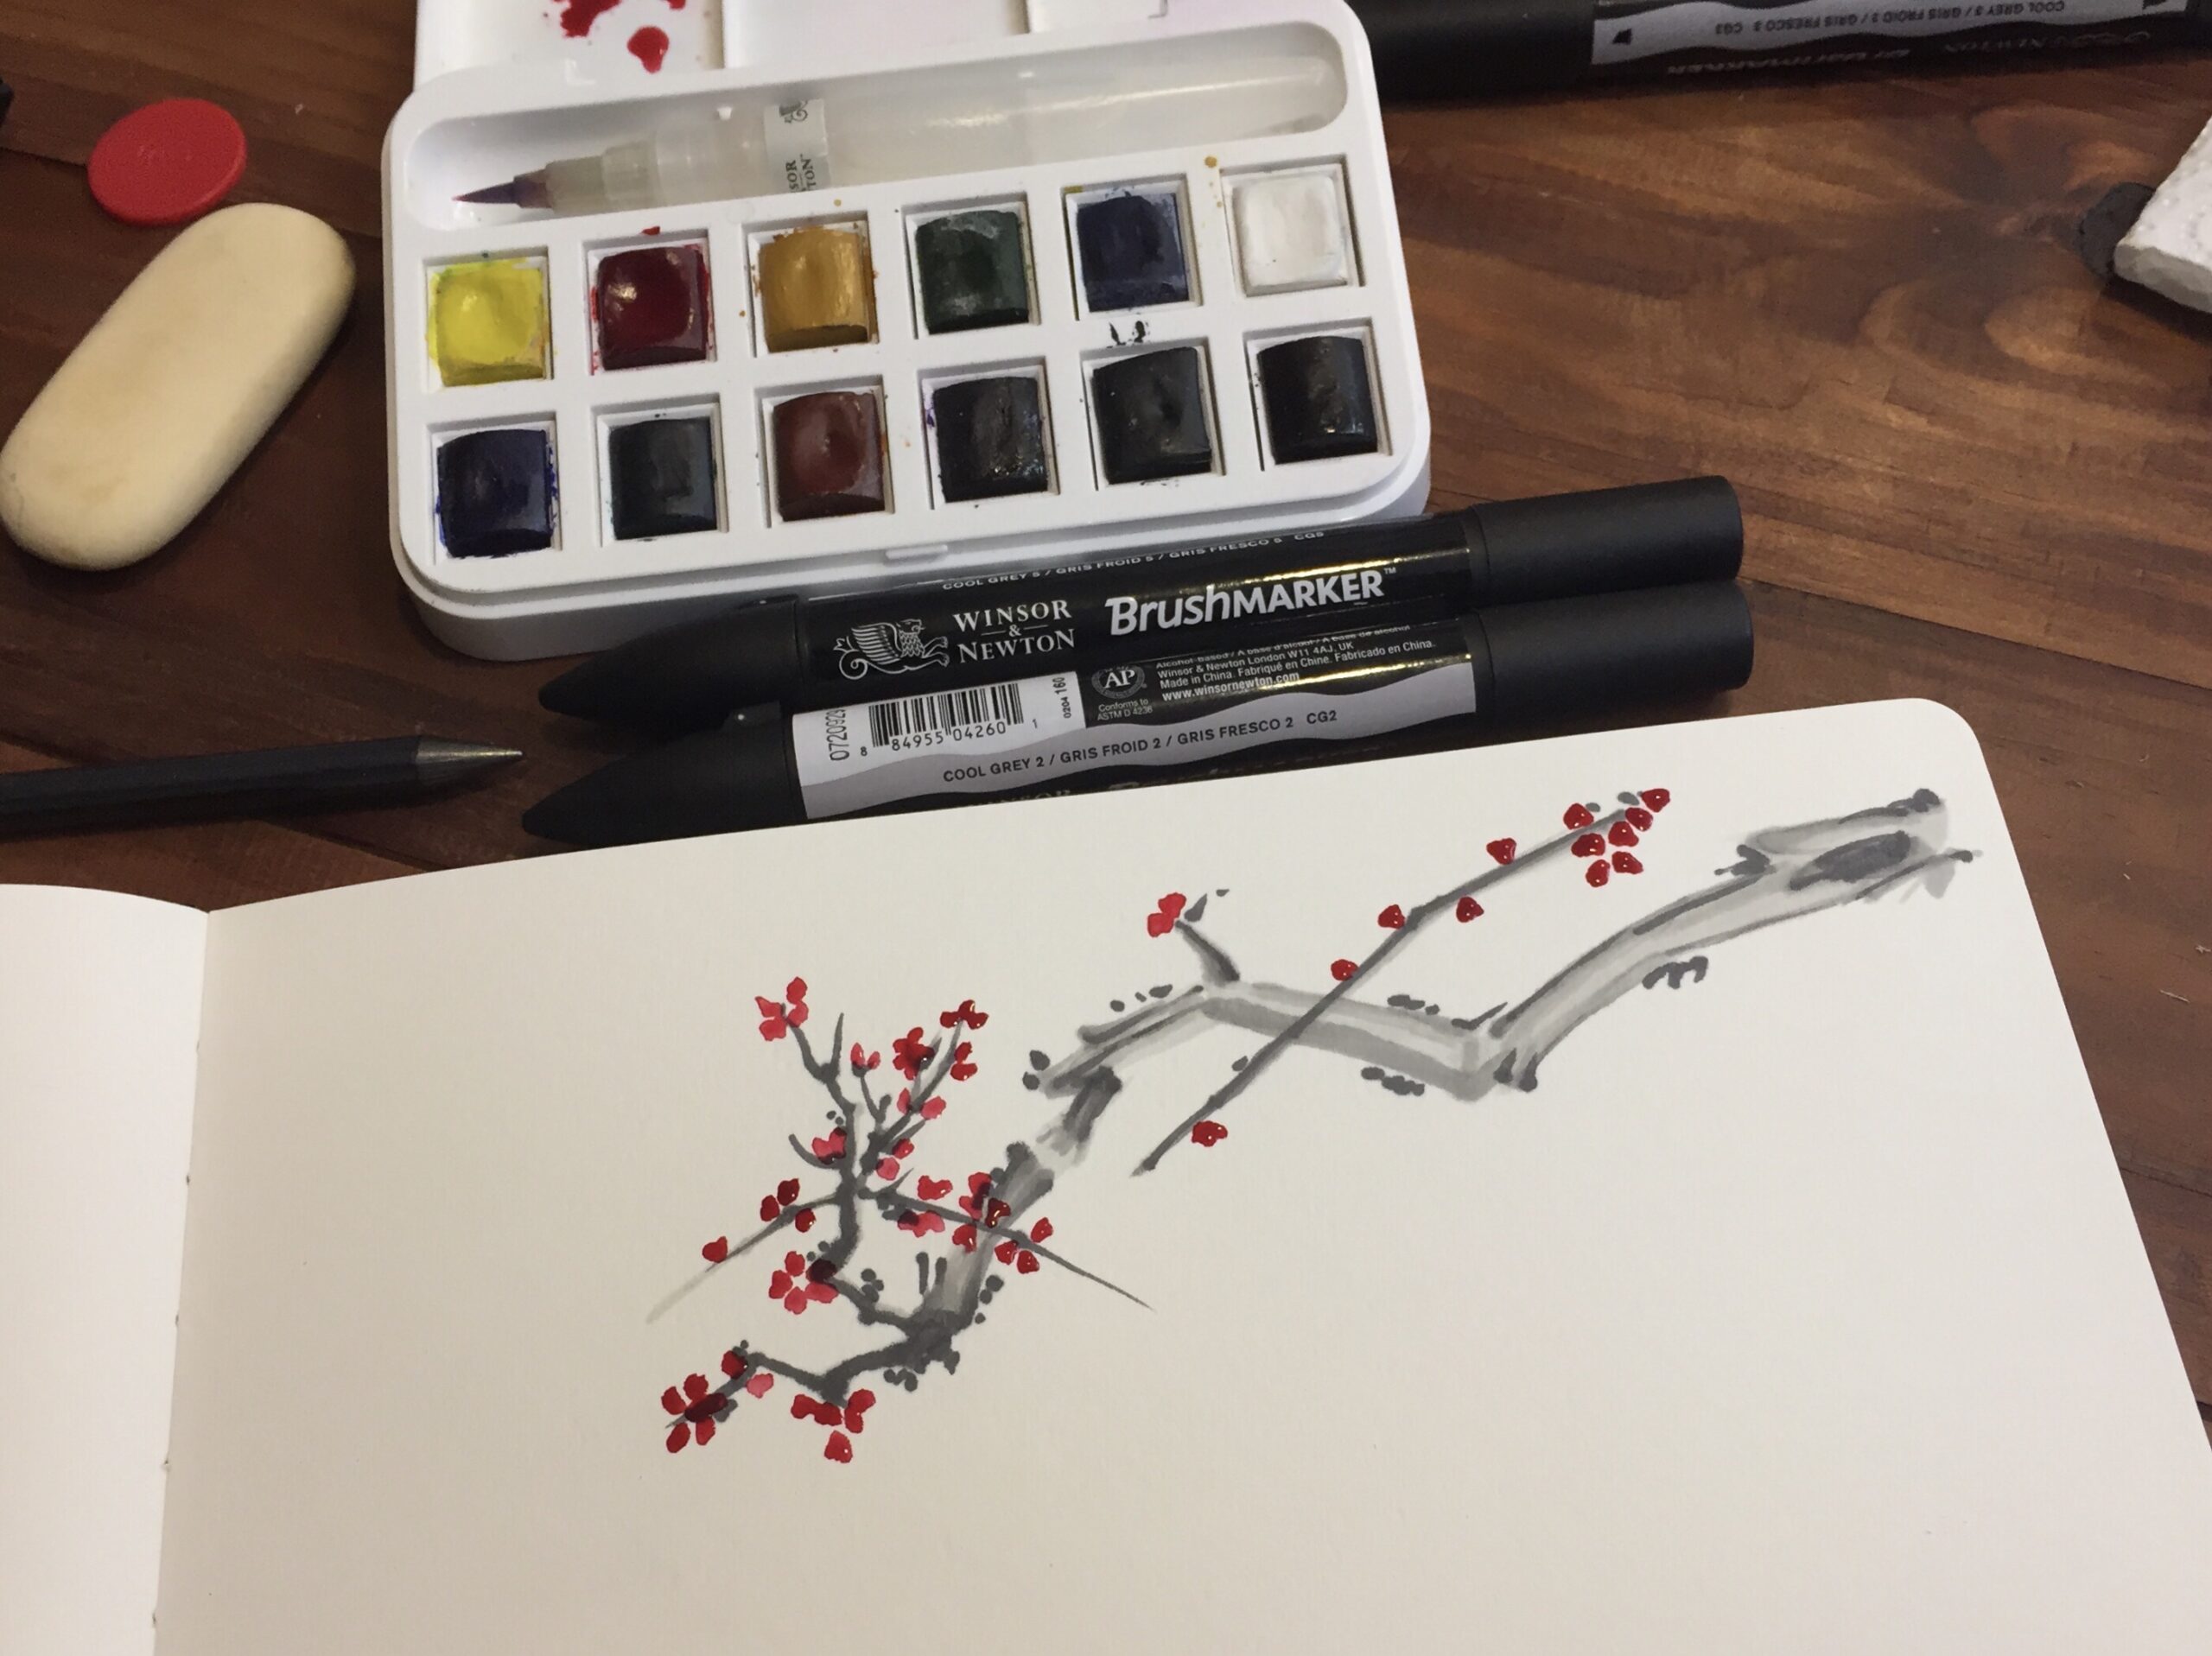 Branch of a blooming tree, done using grey Brushmarkers and alizarin crimson watercolor. The artwork is on a wide drawing book on a table, next to the pens and paint.